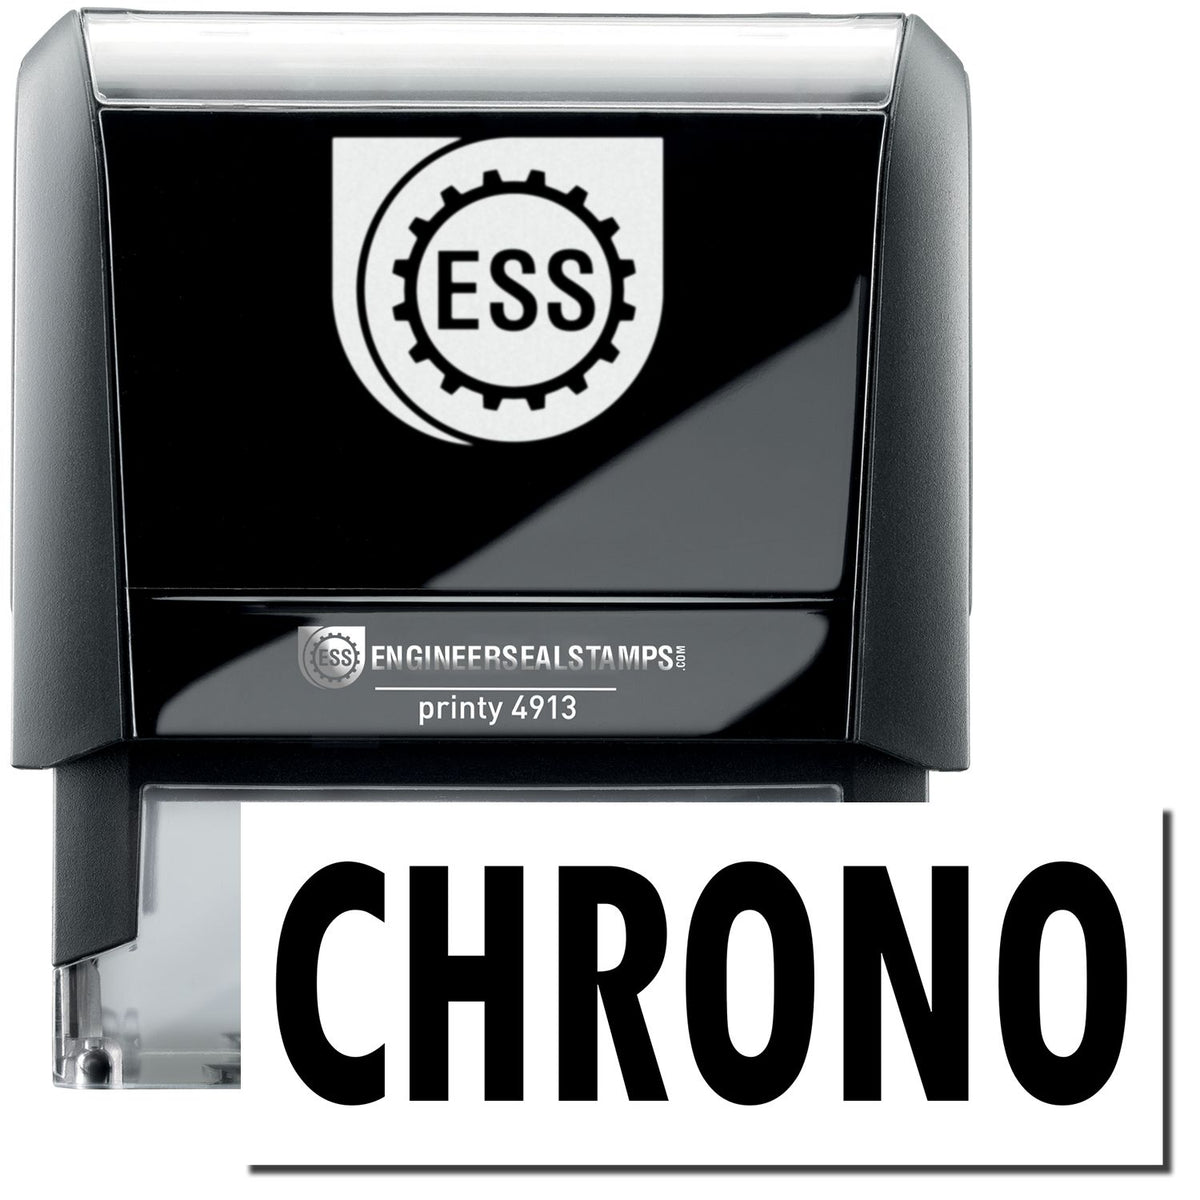 A large self-inking stamp with a stamped image showing how the word &quot;CHRONO&quot; in a large bold font is displayed by it.